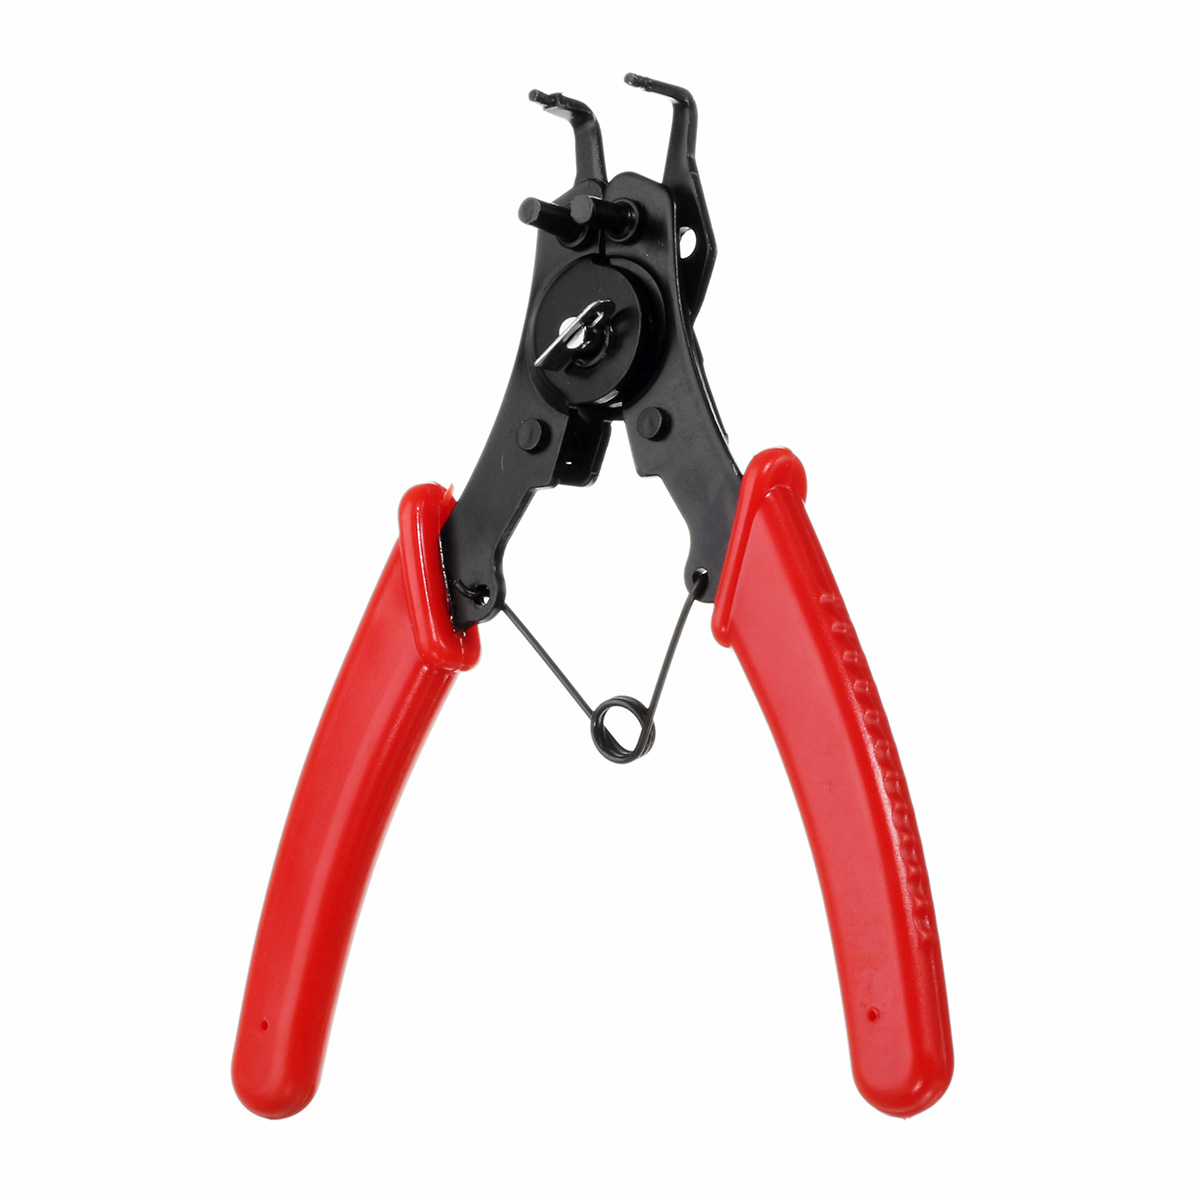 3-in-1-Circlip-Snap-Ring-Pliers-Fastener-Shaft-Used-Spring-Disassembly-Puller-Springs-Tool-Set-1402421